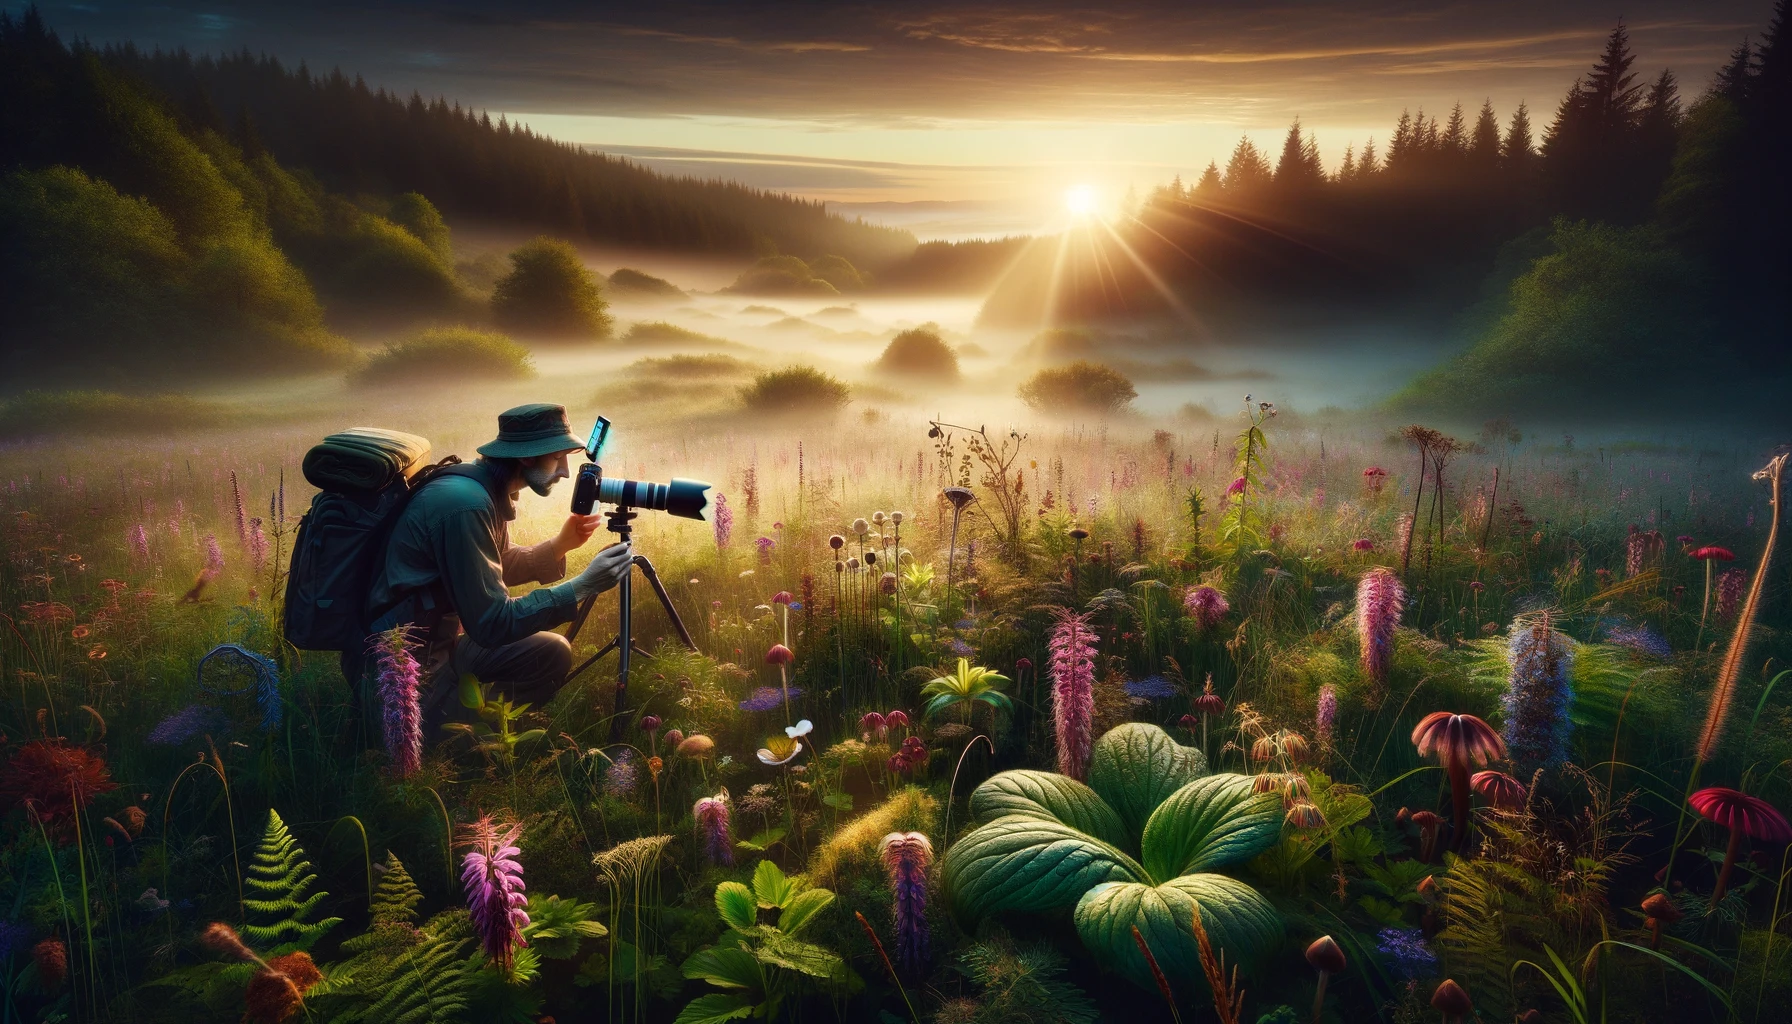 Skilled herbalist with digital tablet and camera examining rare plants in a colorful, misty meadow at dawn. The scene, highlighting a modern approach to ancient herbalism, combines the vibrant beauty of untamed nature with the precision of science, evoking awe for the medicinal uses of wild plants and the importance of preserving natural health remedies